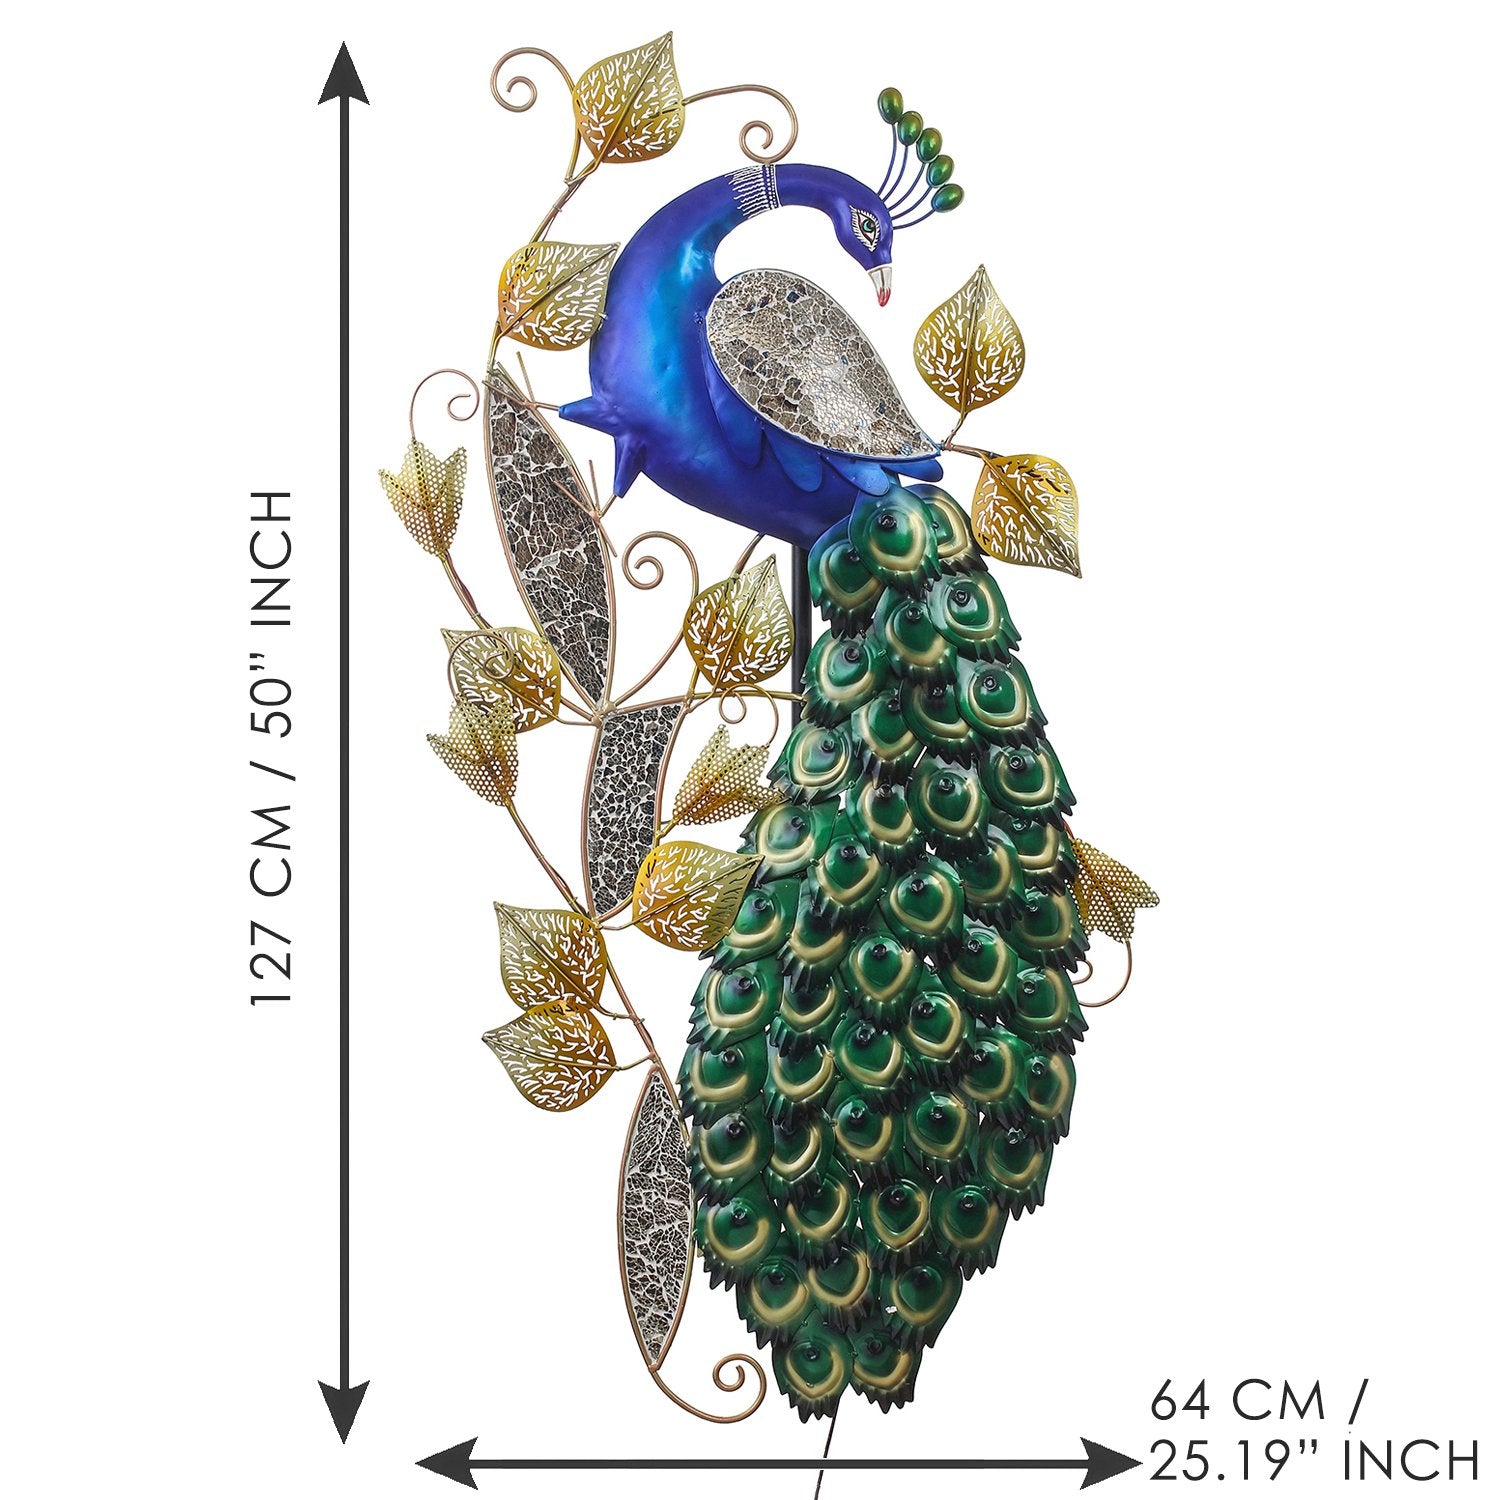 Decorative Colorful Peacock Handcrafted Iron Wall Hanging with background LED's (Blue, Green and Golden) 3